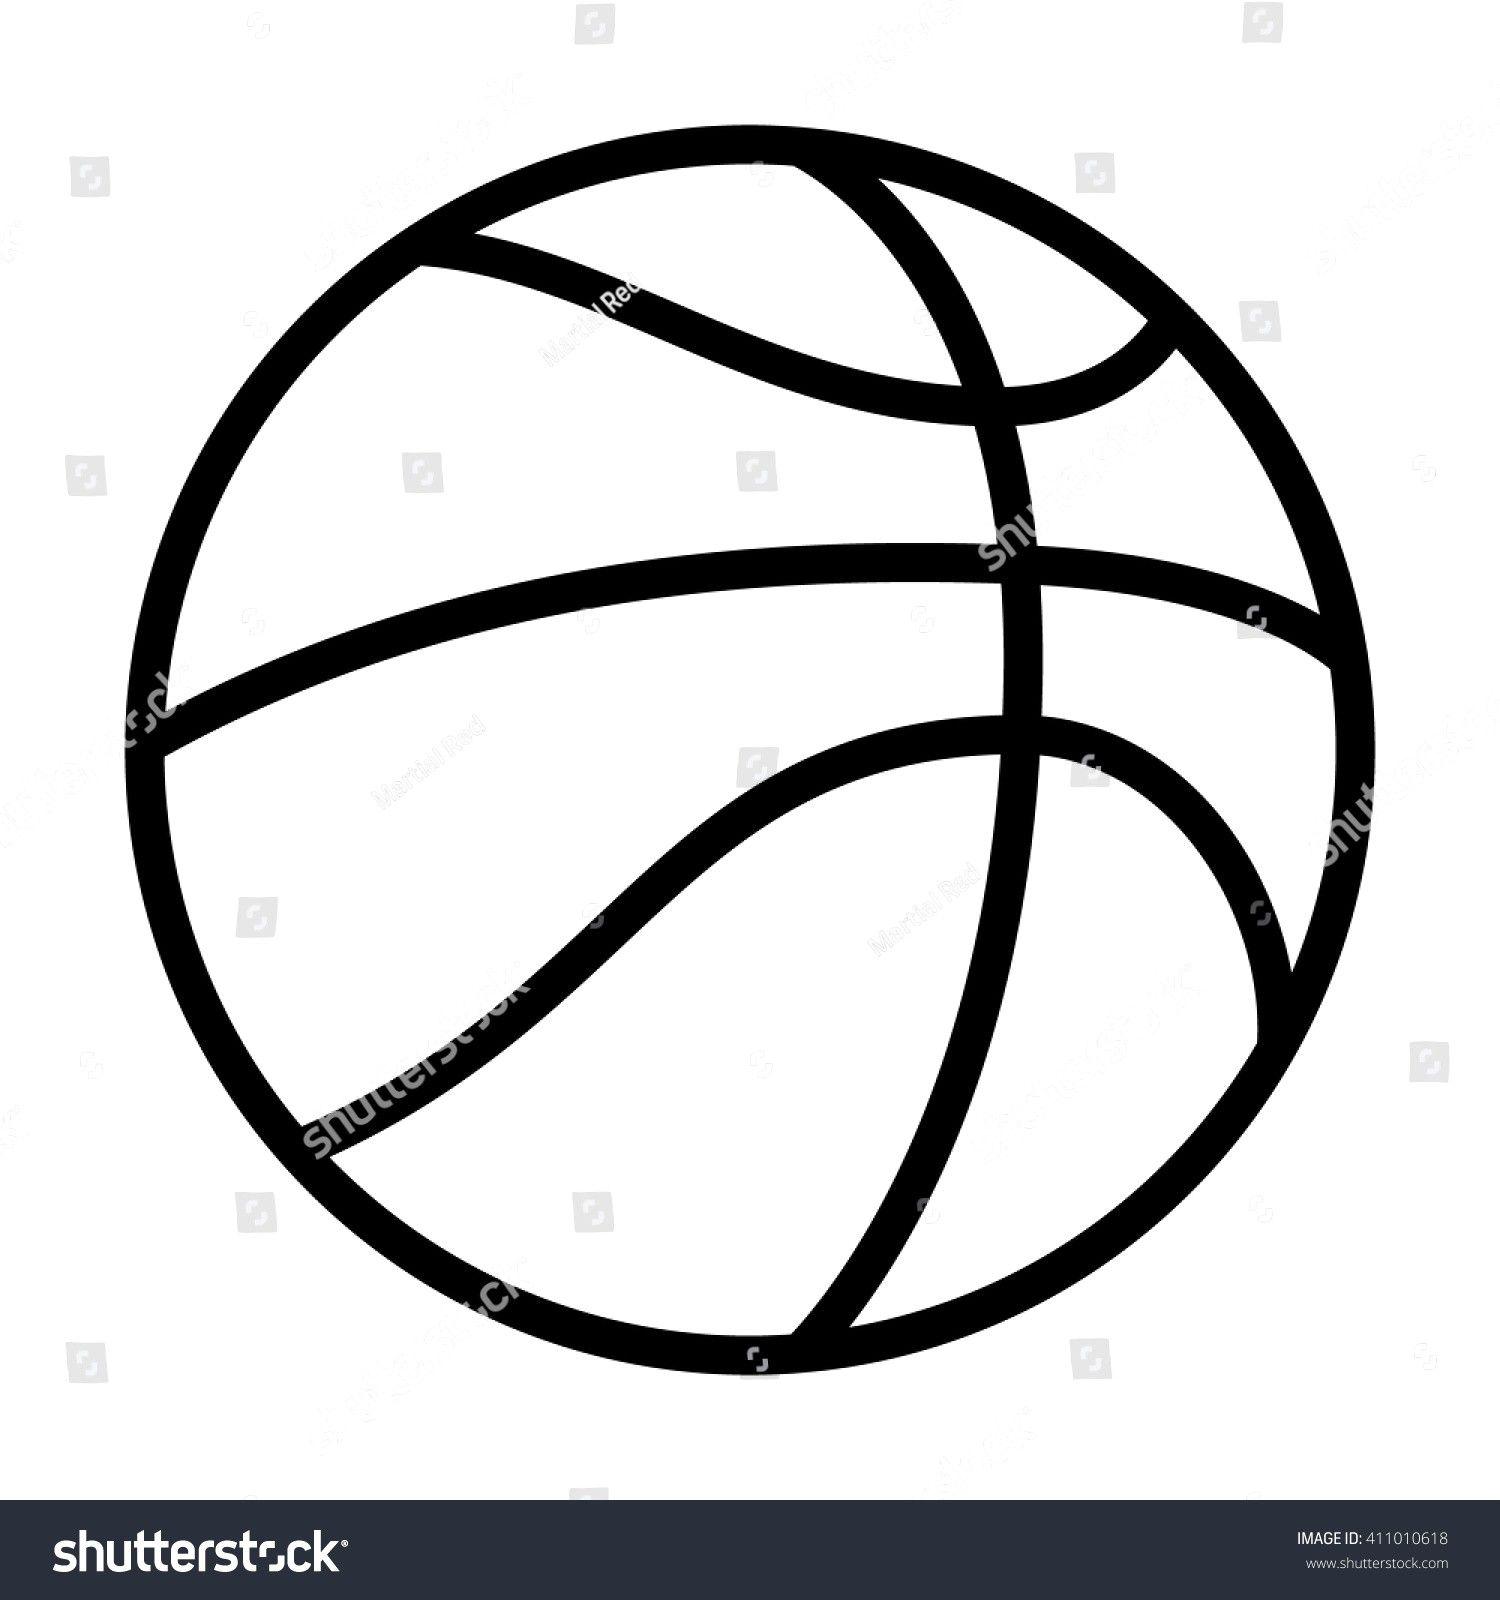 Circle with White Lines Logo - Stock Vector Professional Street Basketball Line Art Icon For Apps ...